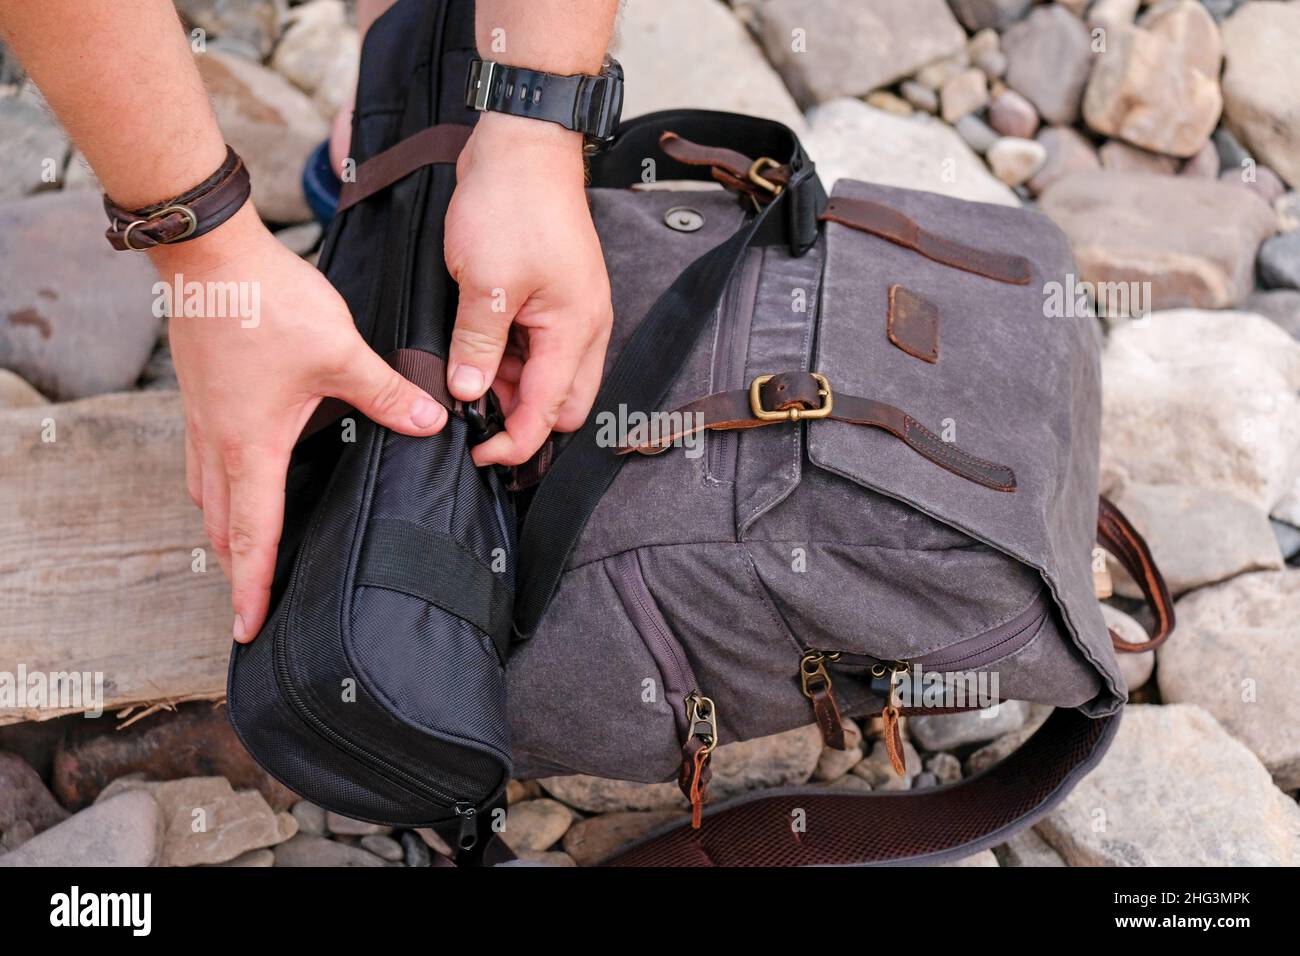 Collect a backpack on the banks of the river, on the stones. Hands visible. Stock Photo